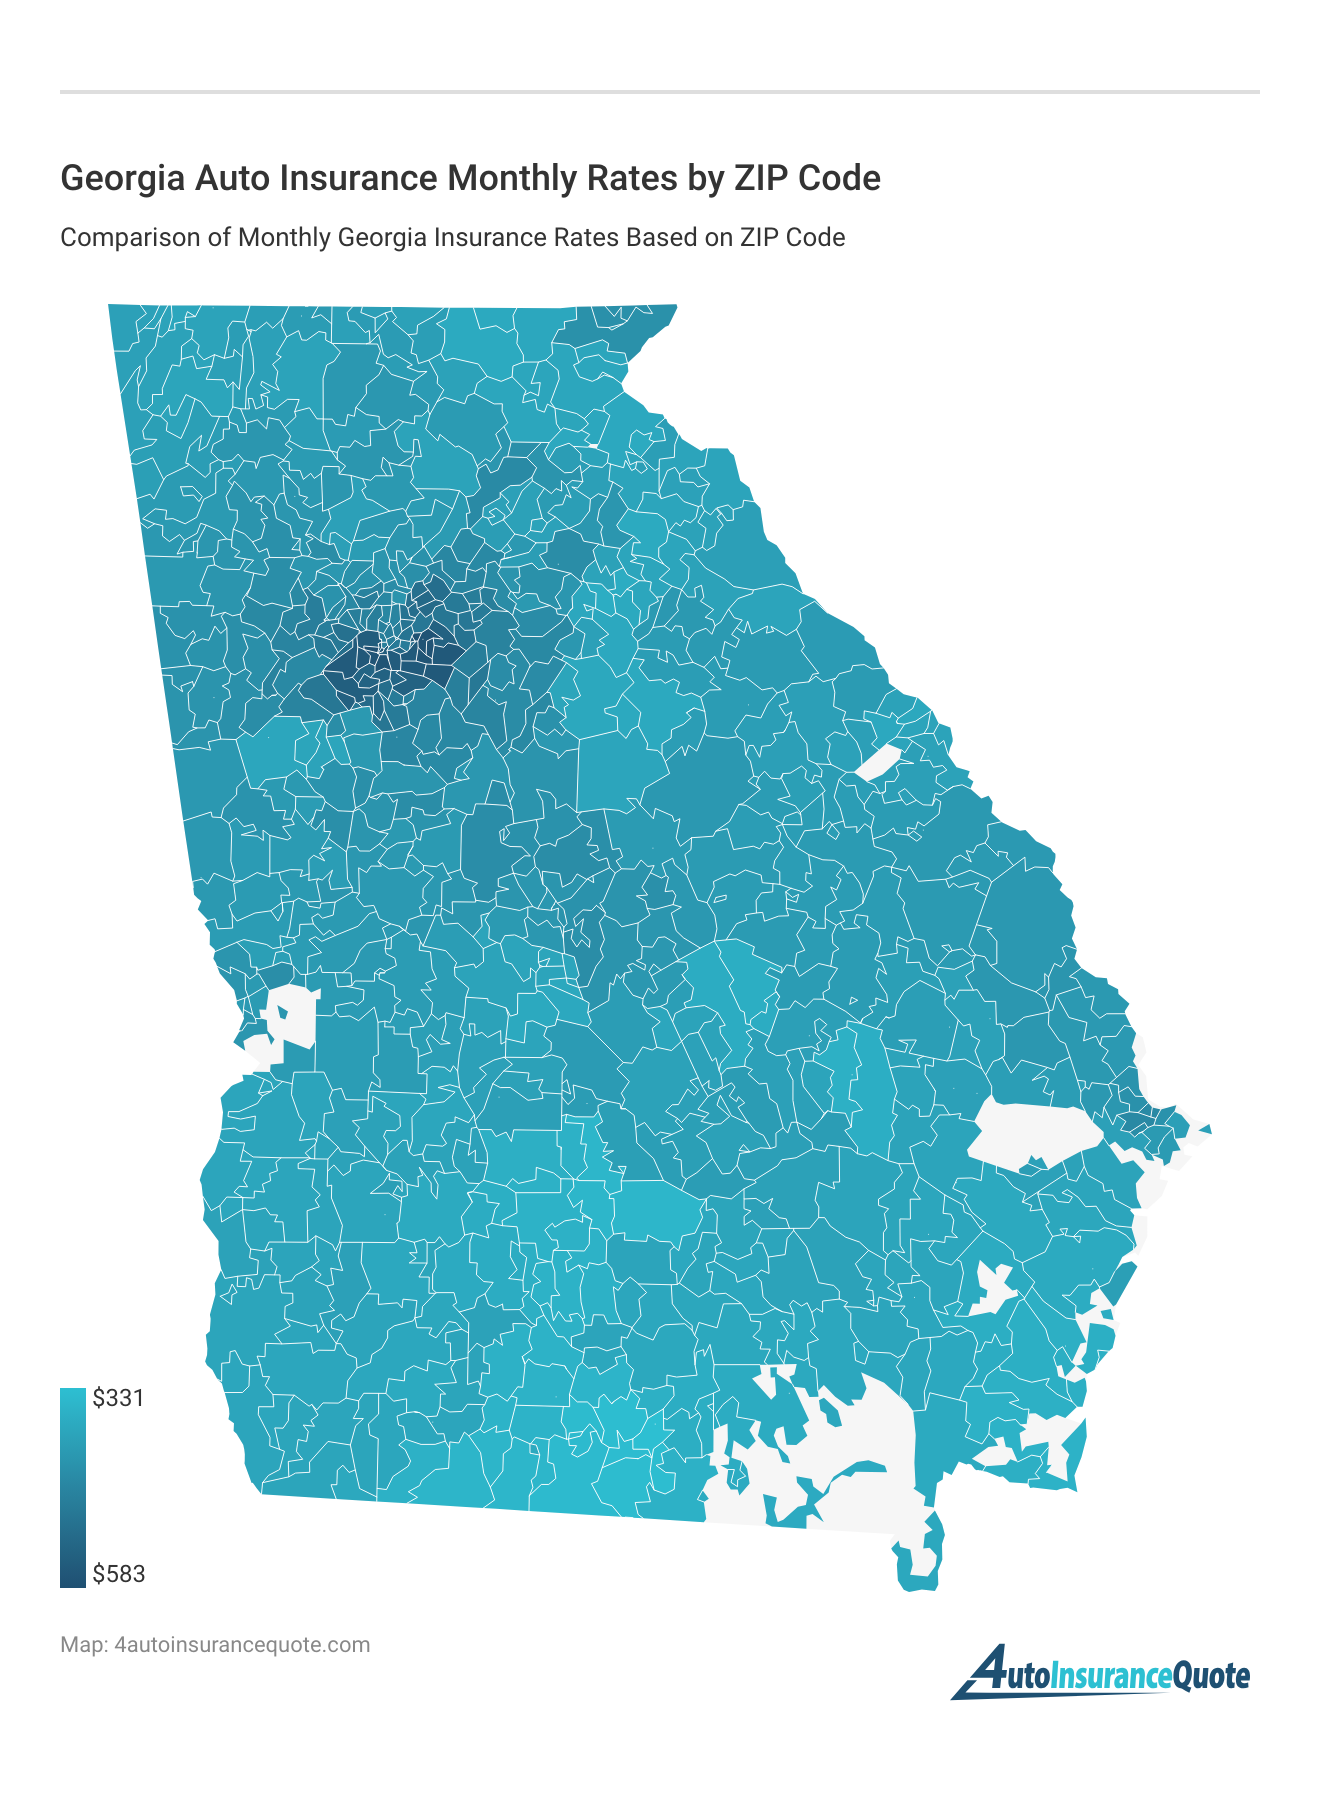 <h3>Georgia Auto Insurance Monthly Rates by ZIP Code</h3>